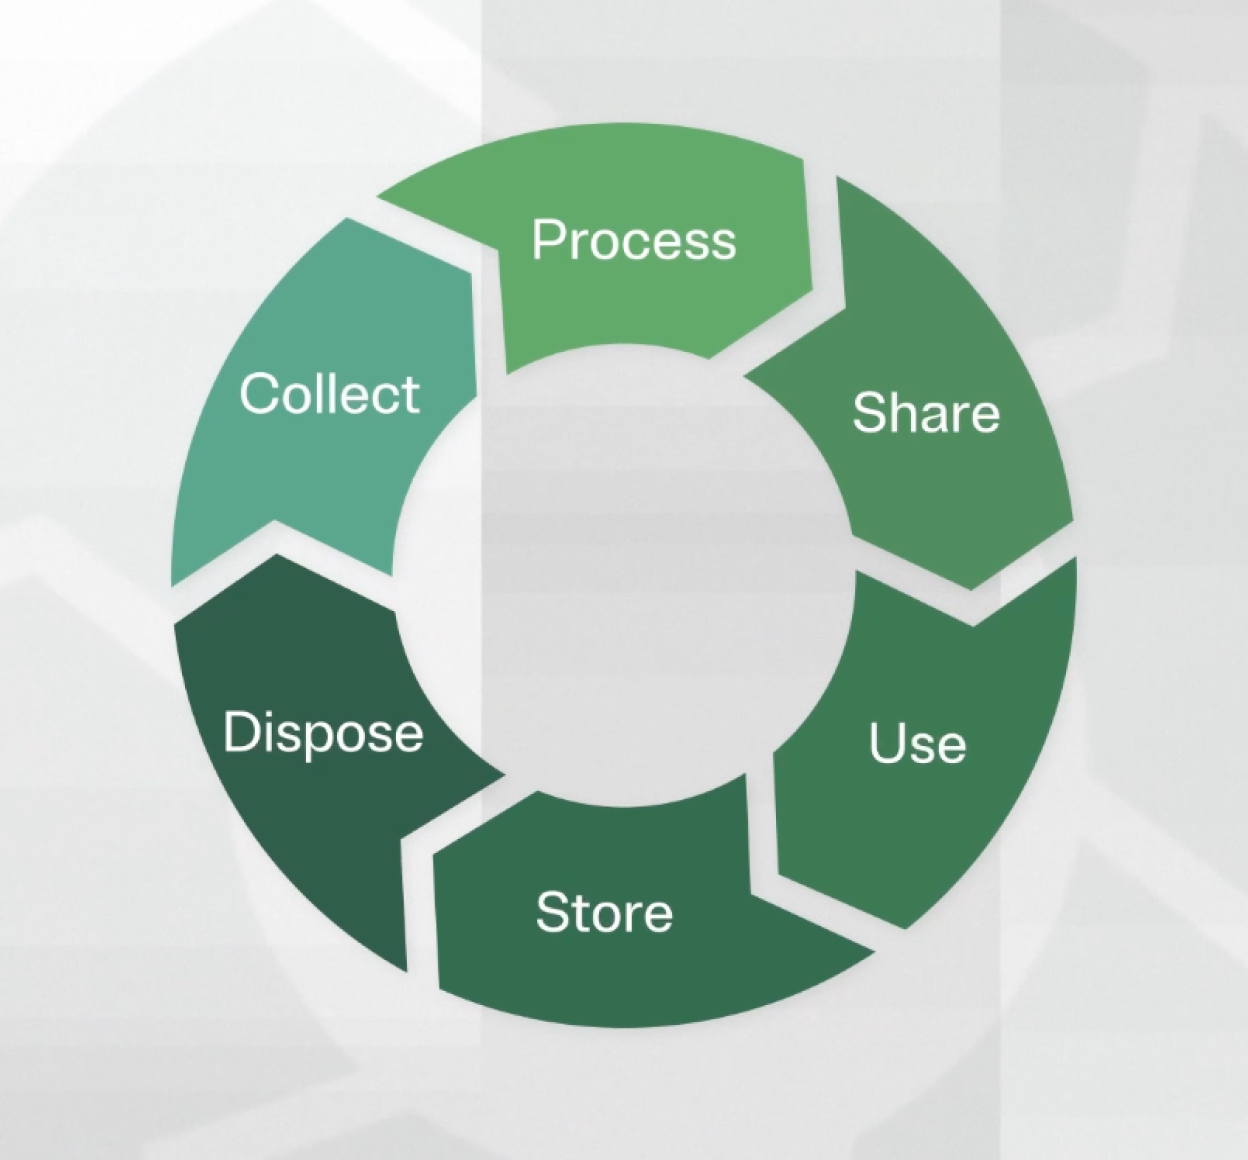 Graphic depicting a cycle with the words "process", "share", "use", "store", "dispose", "collect" in segments around it representing the information lifecycle